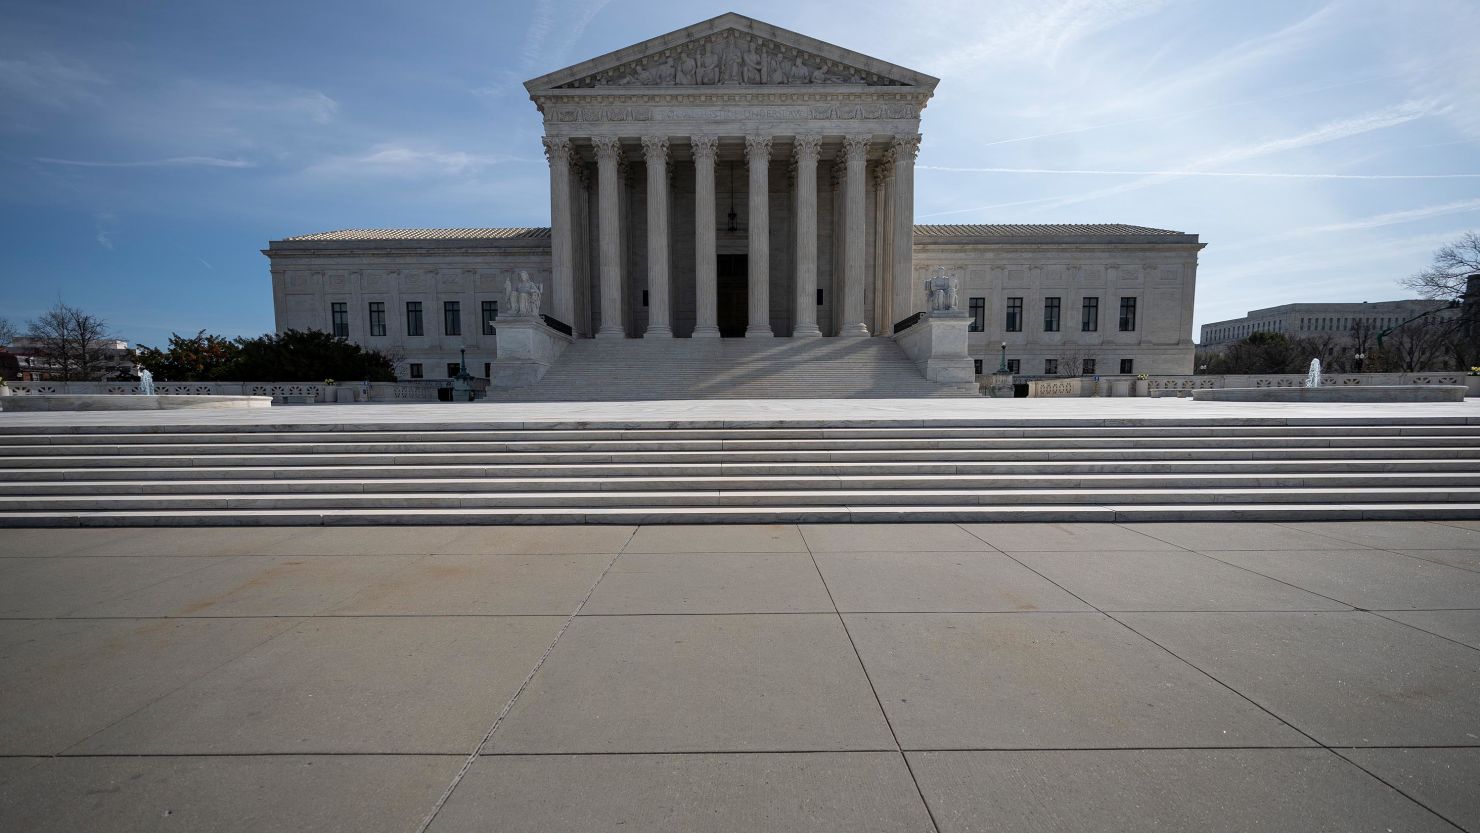 The U.S. Supreme Court stands on March 16, 2020 in Washington, DC. The Supreme Court announced on Monday that it would postpone oral arguments for its March session because of the coronavirus outbreak.